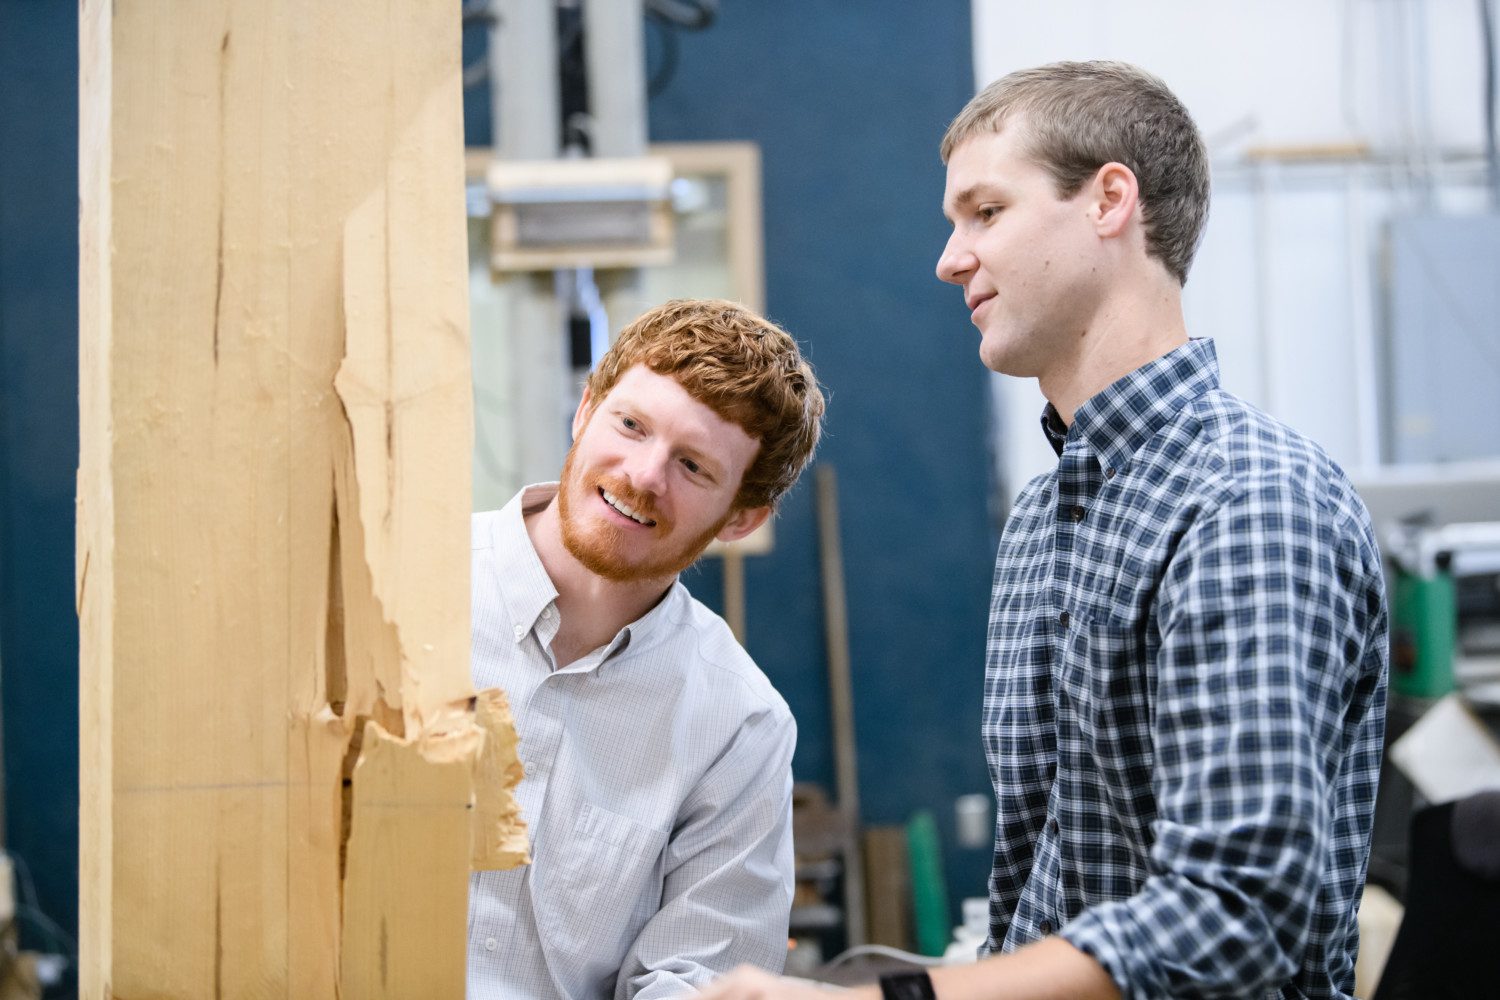 Graham Montgomery, left, and Michael Stoner examine a piece of wood that was put to the test in research at Clemson University.